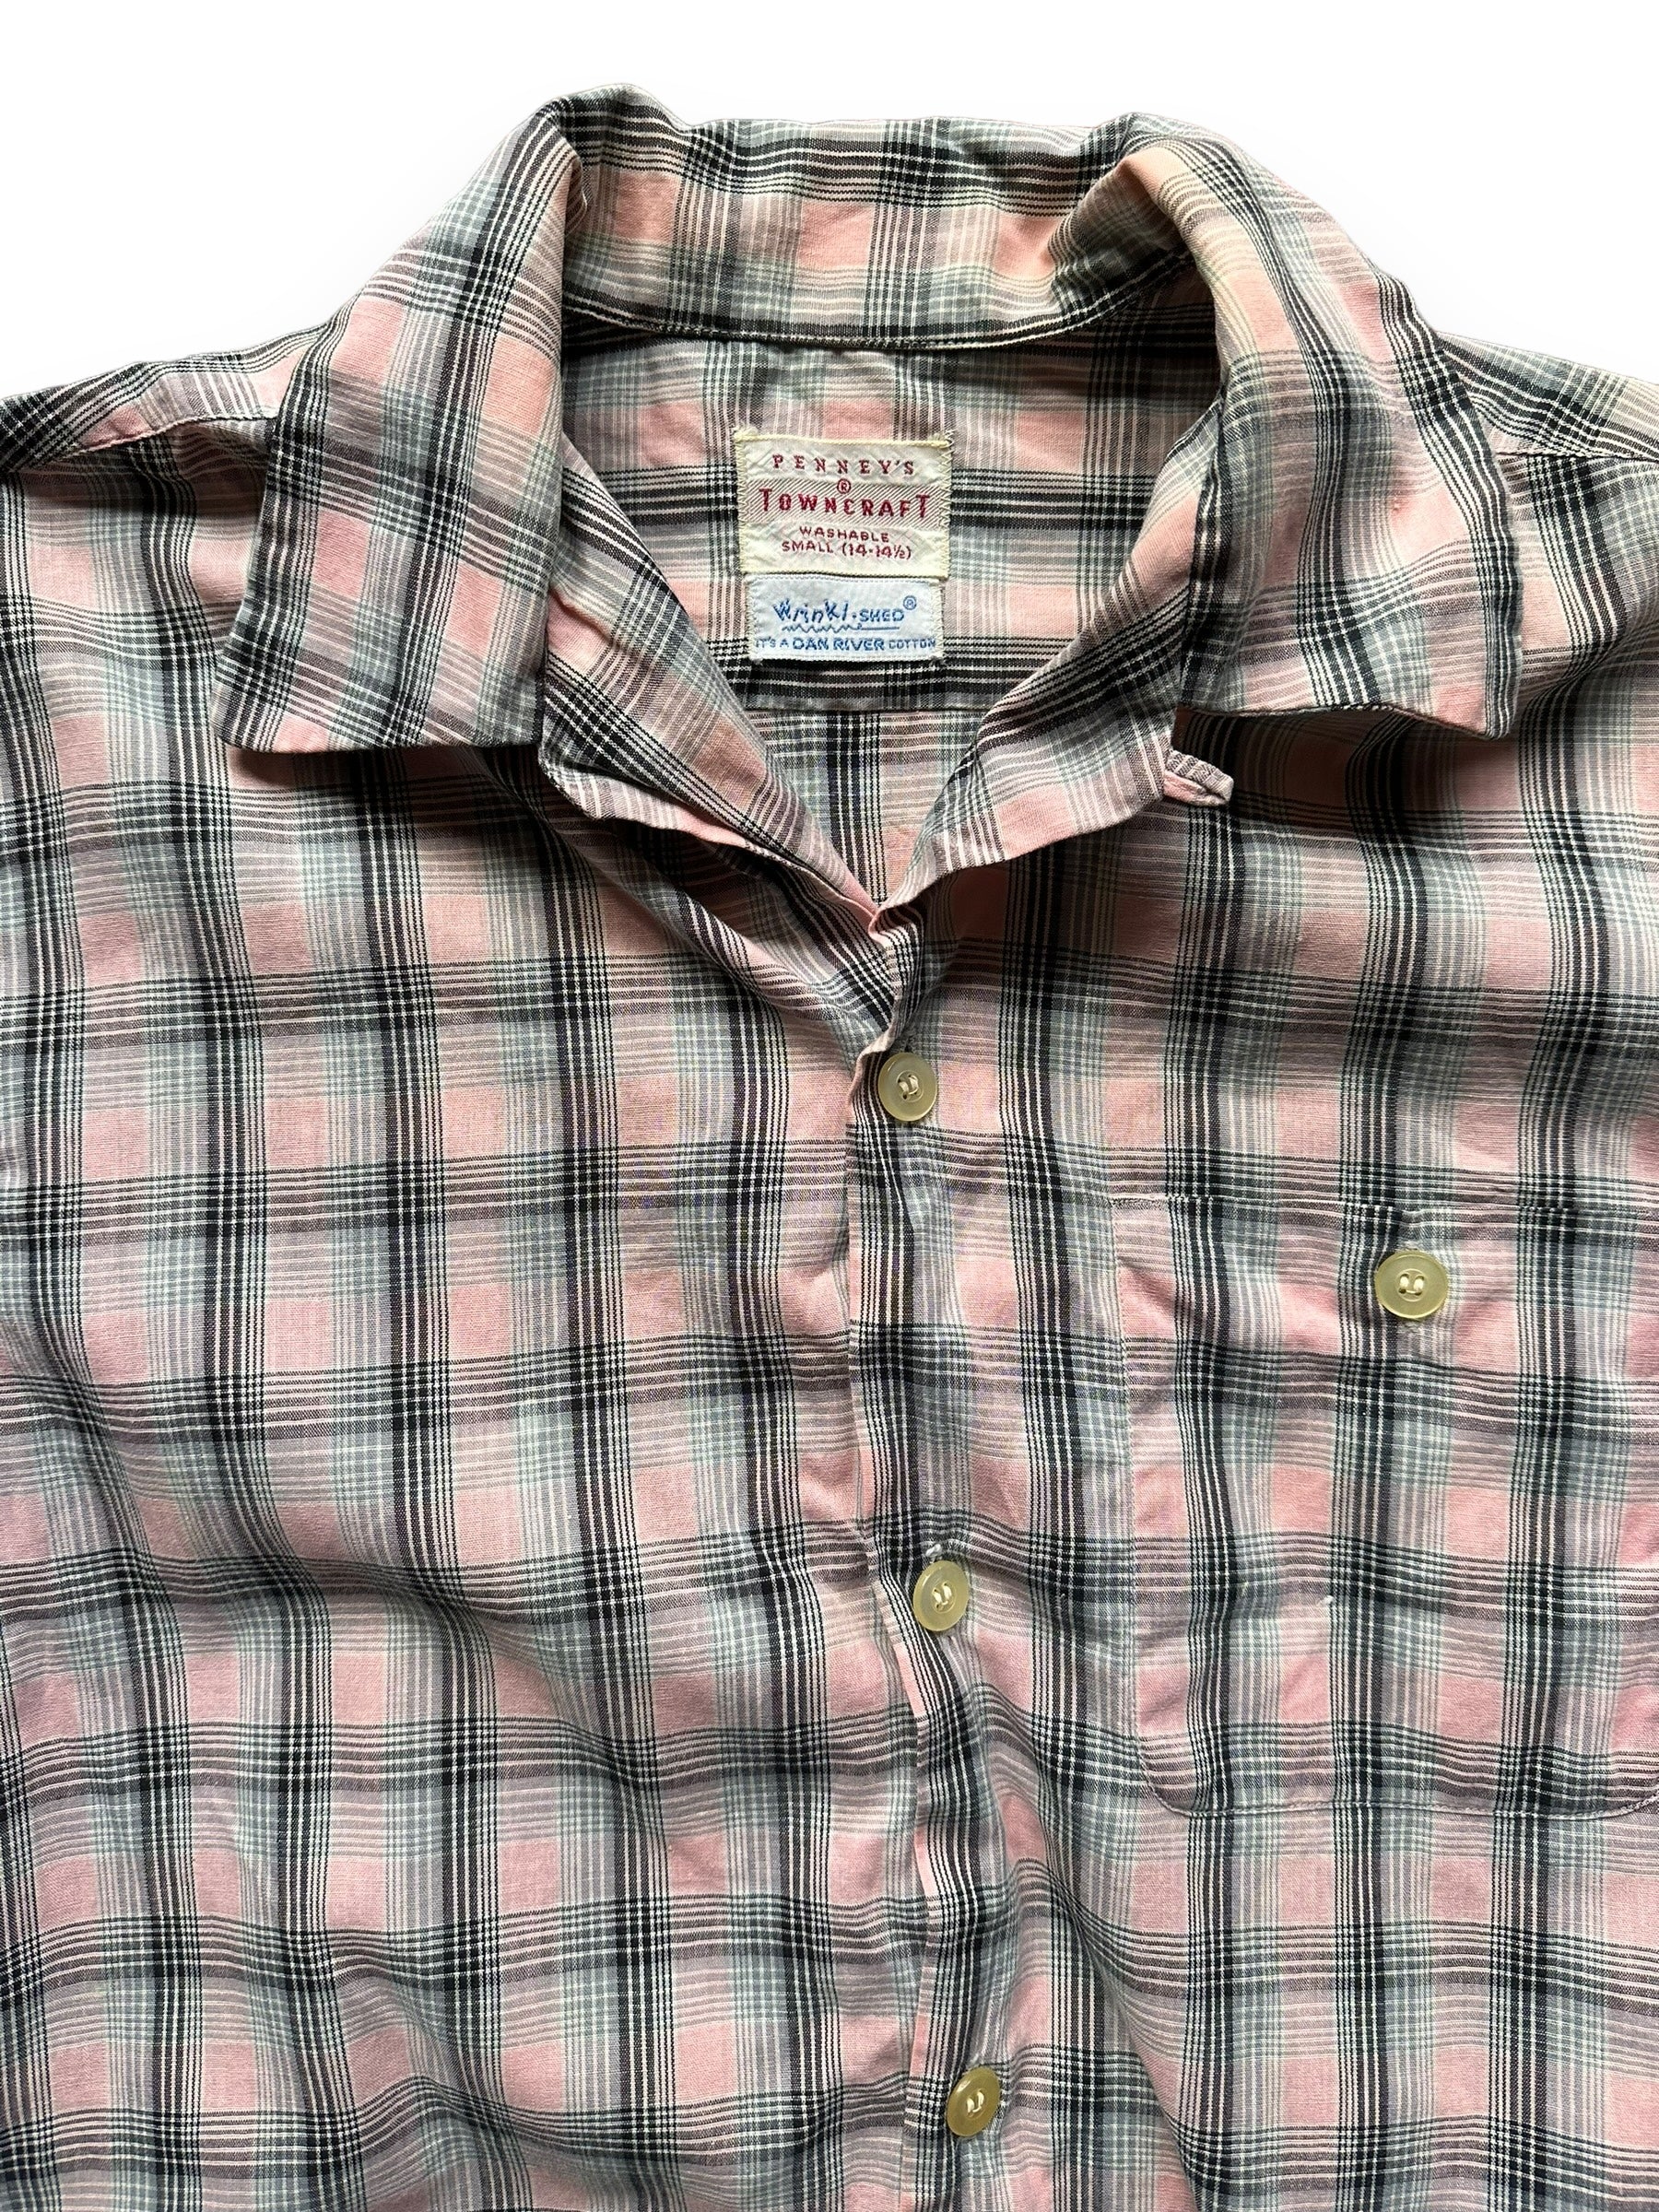 Tag View of Vintage Penney's Towncraft Wrinkl-Shed Shirt SZ S | Vintage Rockabilly Shirt Seattle | Barn Owl Vintage Seattle